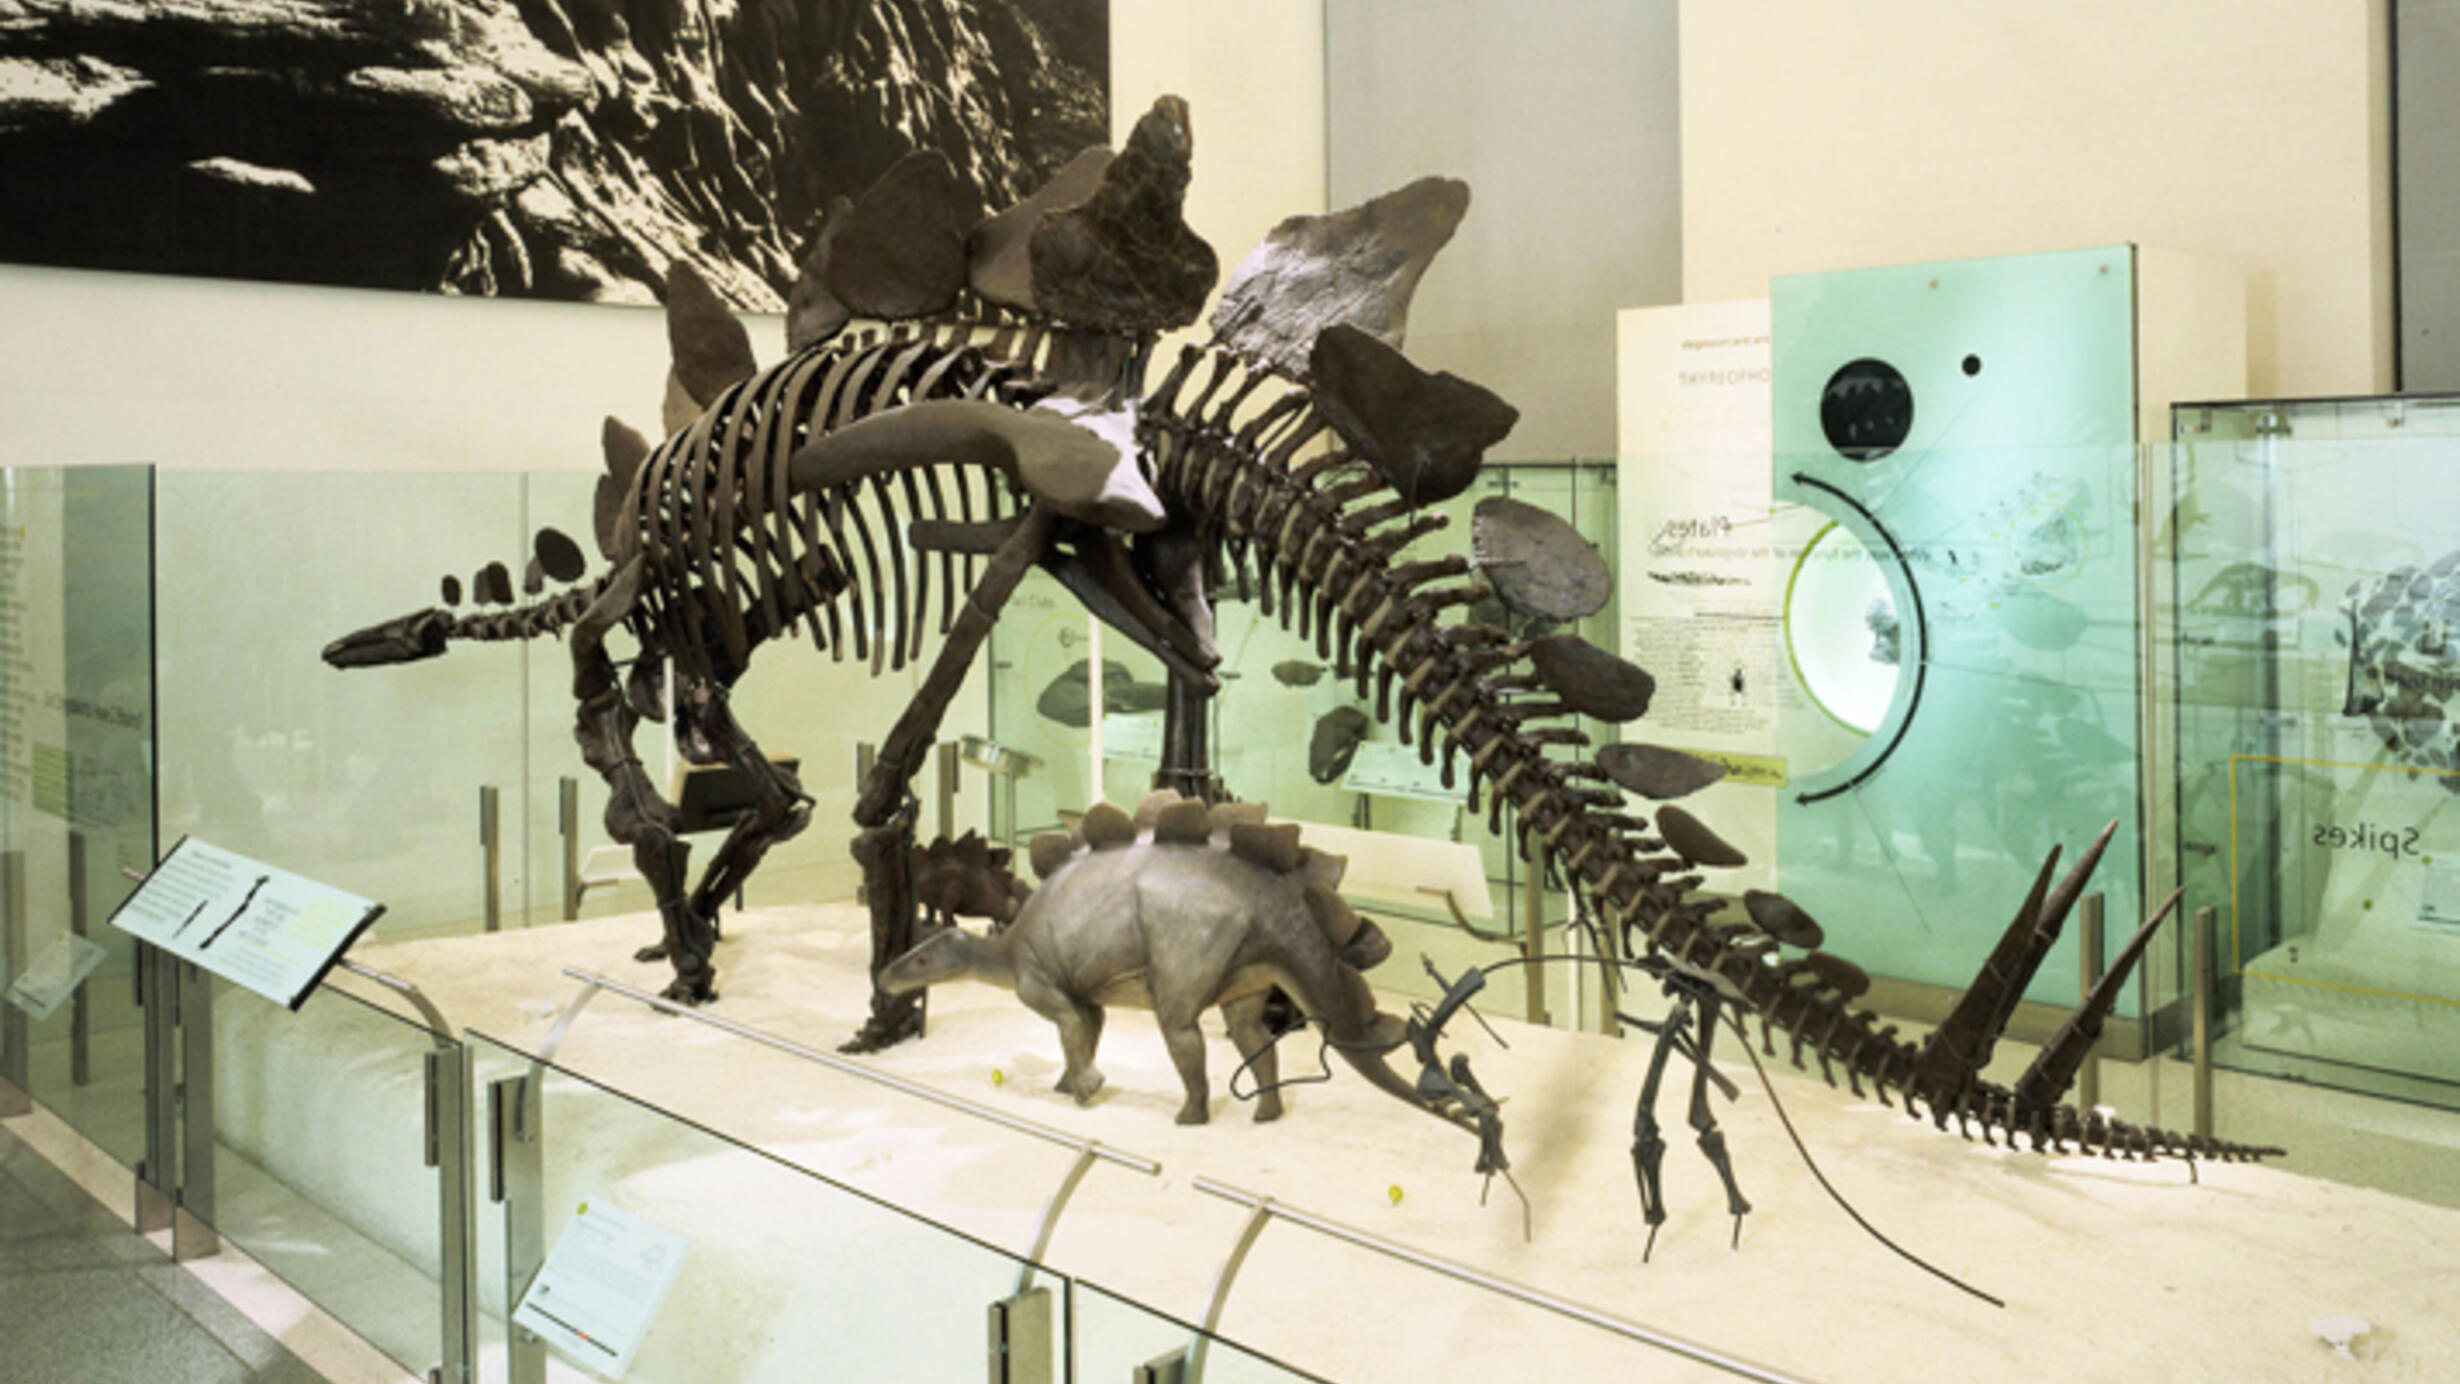 A mounted stegosurus fossil shown next to a small model of the dinosaur.